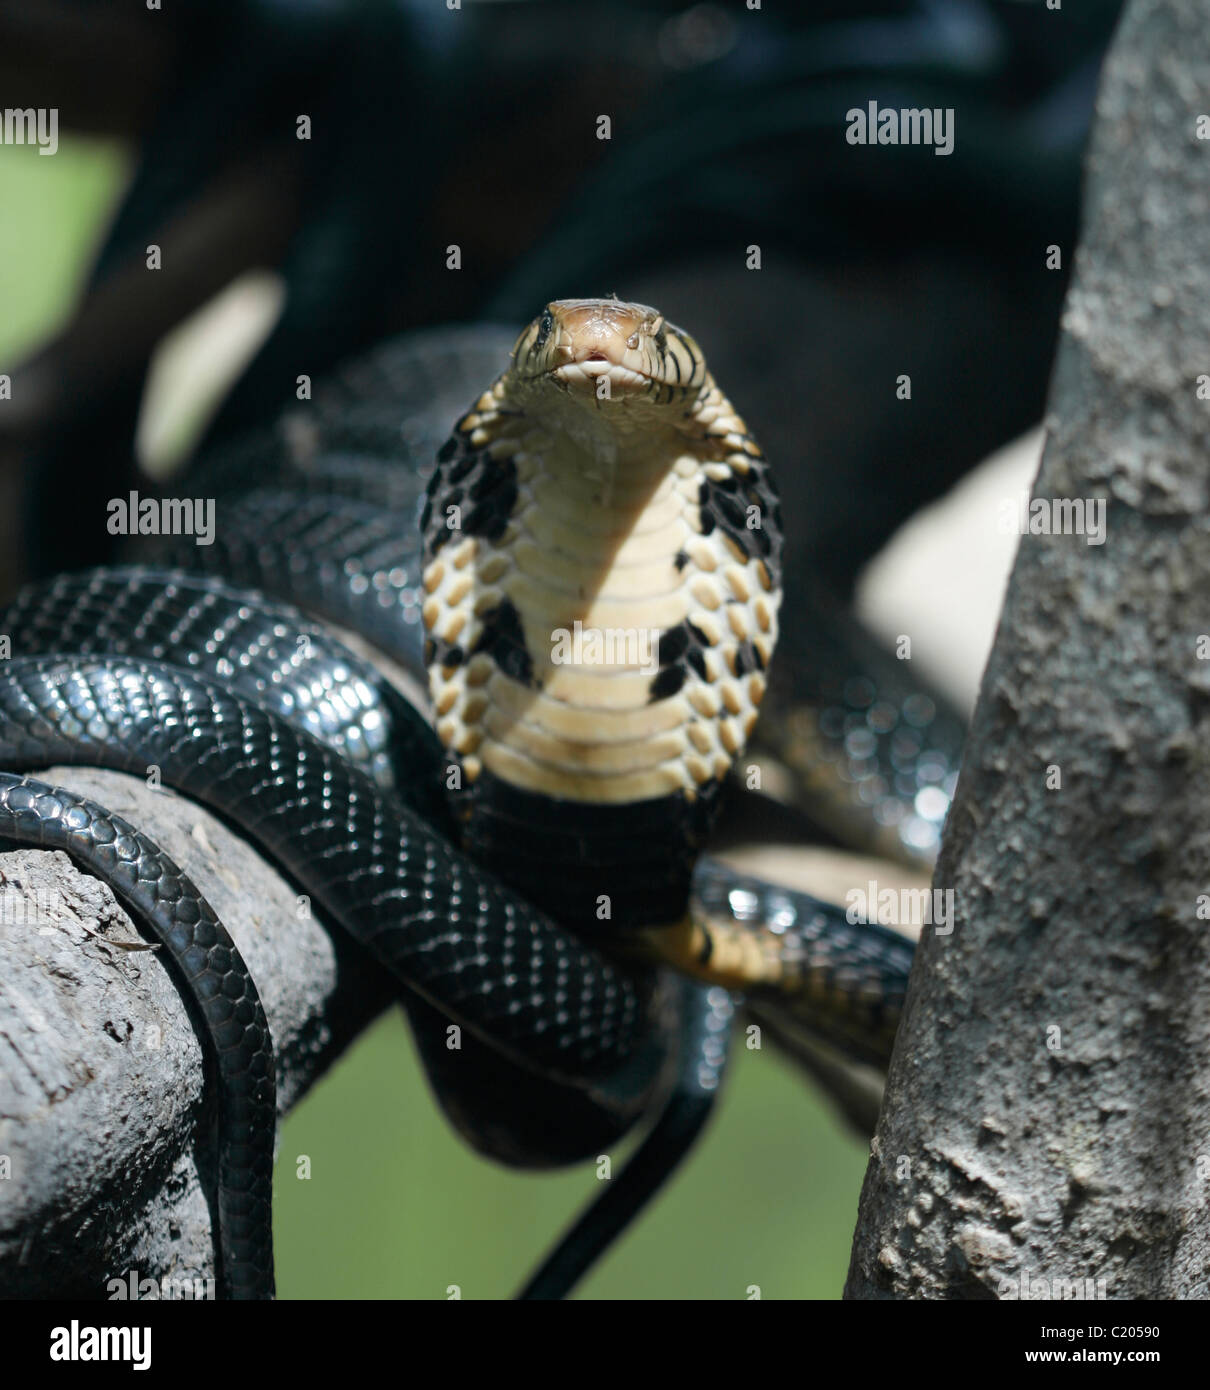 A forest cobra (Naja melanoleuca) in a tree in Uganda, with its hood extended and ready to strike Stock Photo